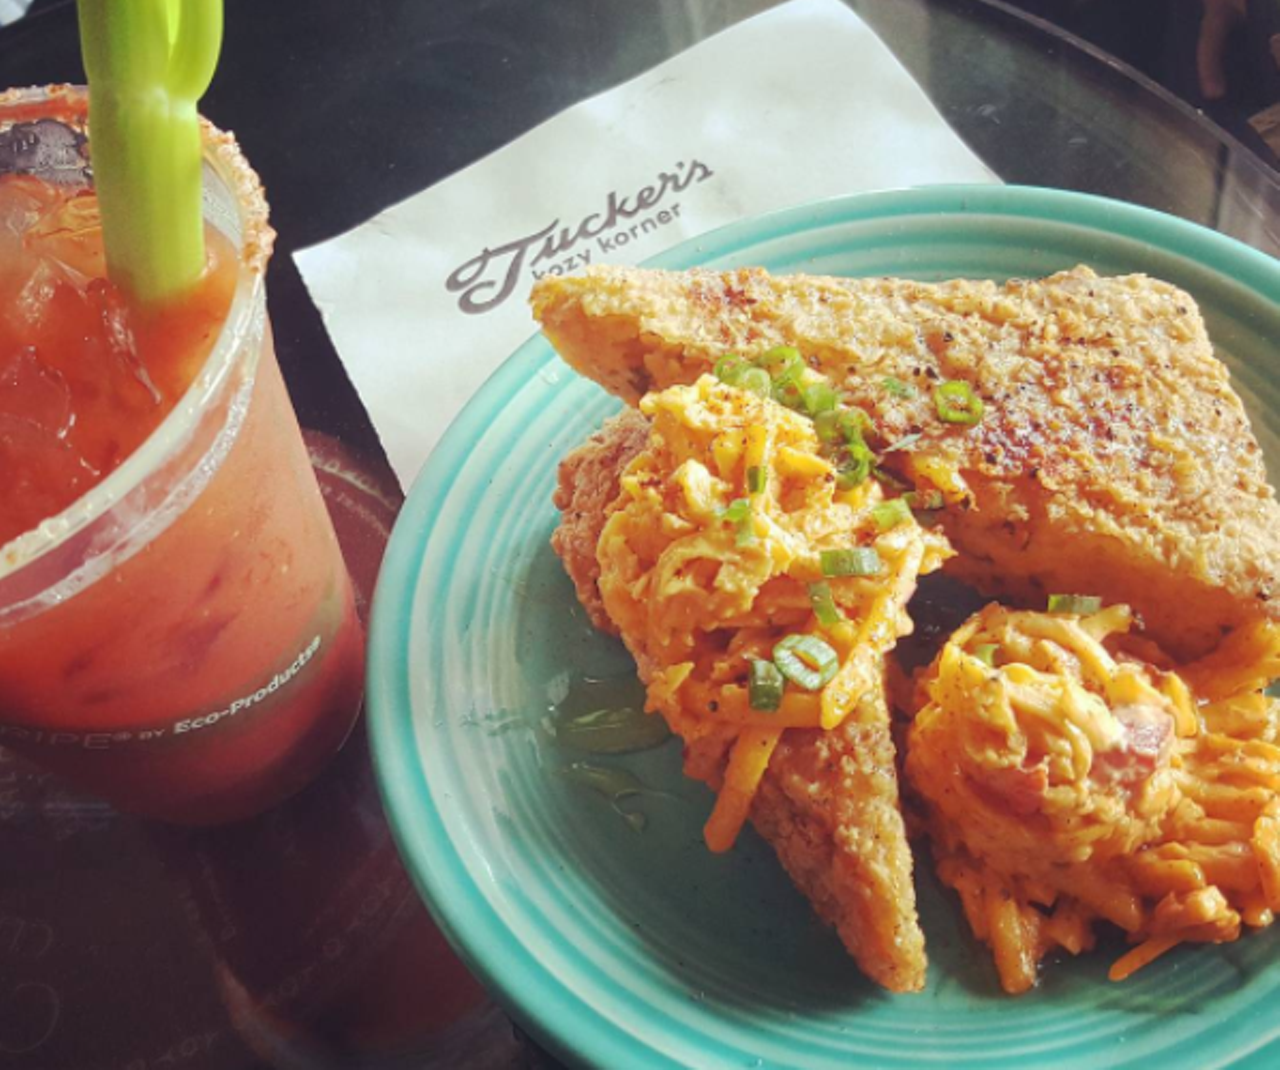 Tucker's Kozy Korner
1338 E Houston, (210) 320-2192
Tucker&#146;s fans can spend their Saturday nights dancing and later recovering on Sunday brunch from 11 a.m. to 3 p.m. Nurse that hangover with sweet potato hash and Eggs Benedict.
Photo via Instagram, ceasarzepeda